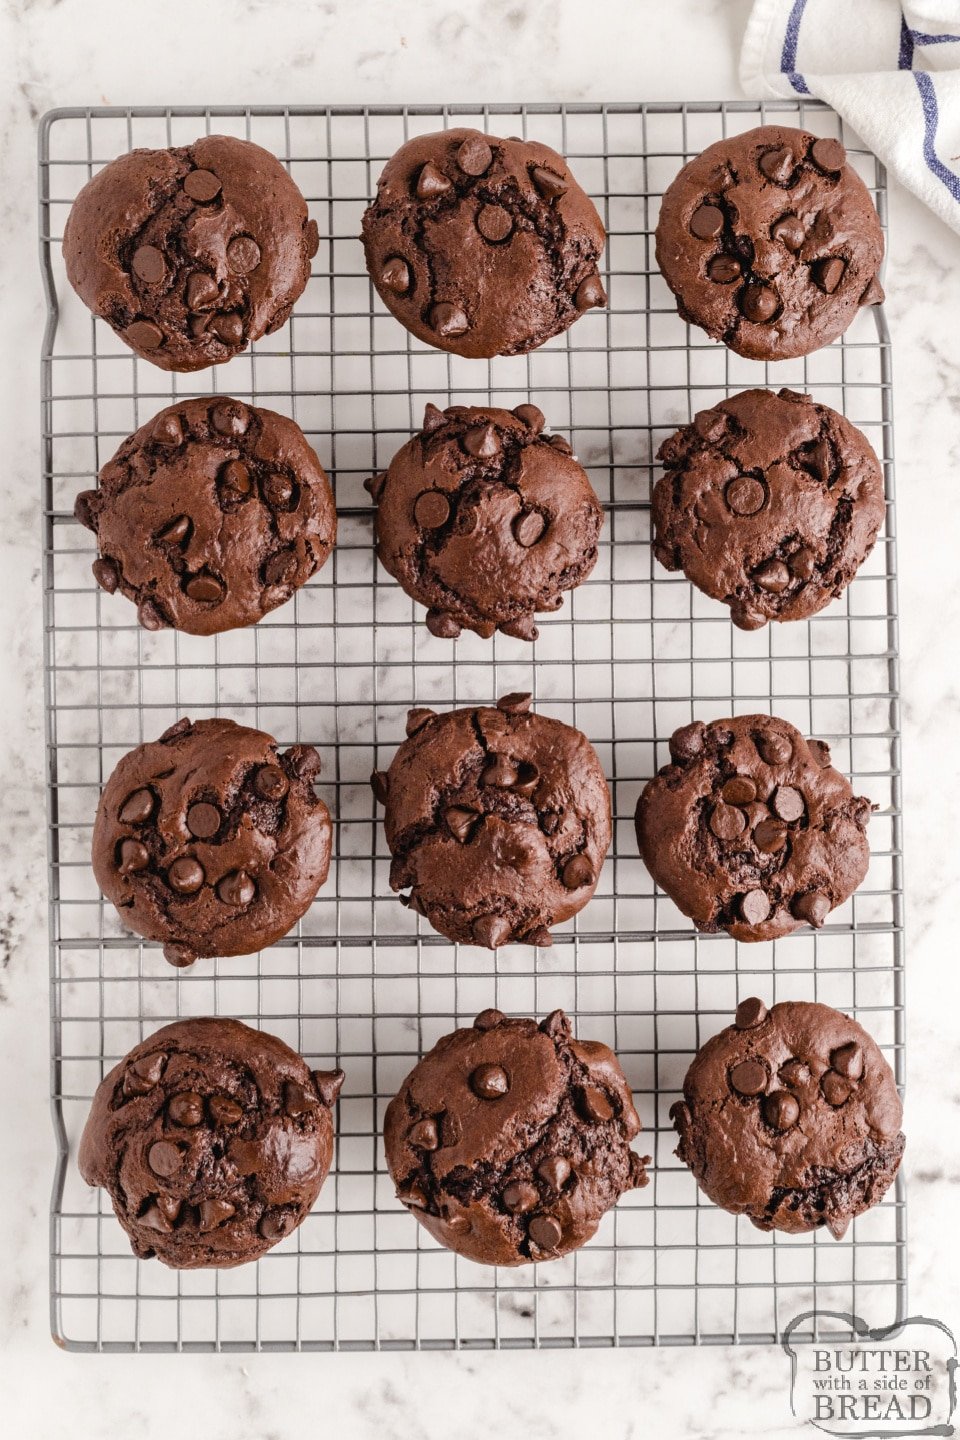 Copycat Costco Chocolate Muffins taste just like the amazing double chocolate muffins from Costco. Easy chocolate chocolate chip muffin recipe that everyone loves!